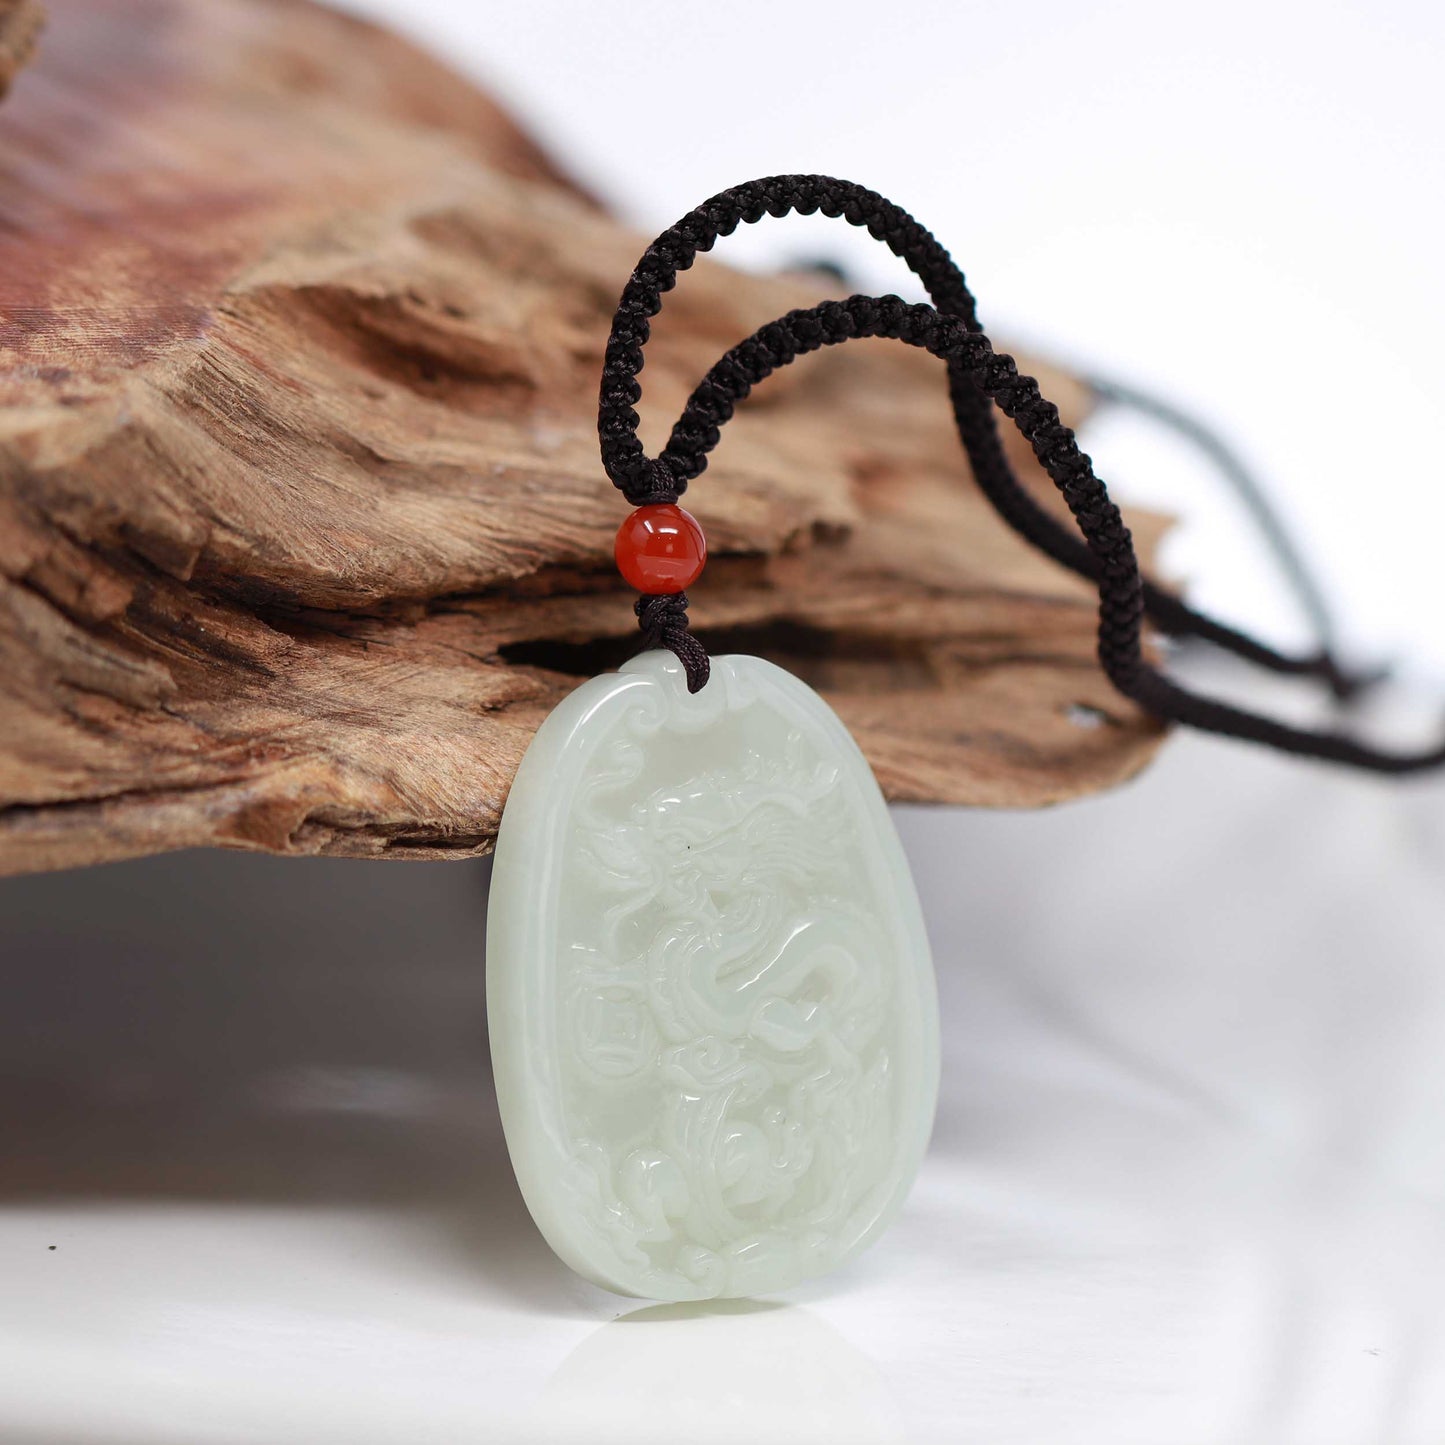 Load image into Gallery viewer, Genuine White Nephrite White Jade Dragon Pendant Necklace, Real Jade Jewelry For Men, RealJade
